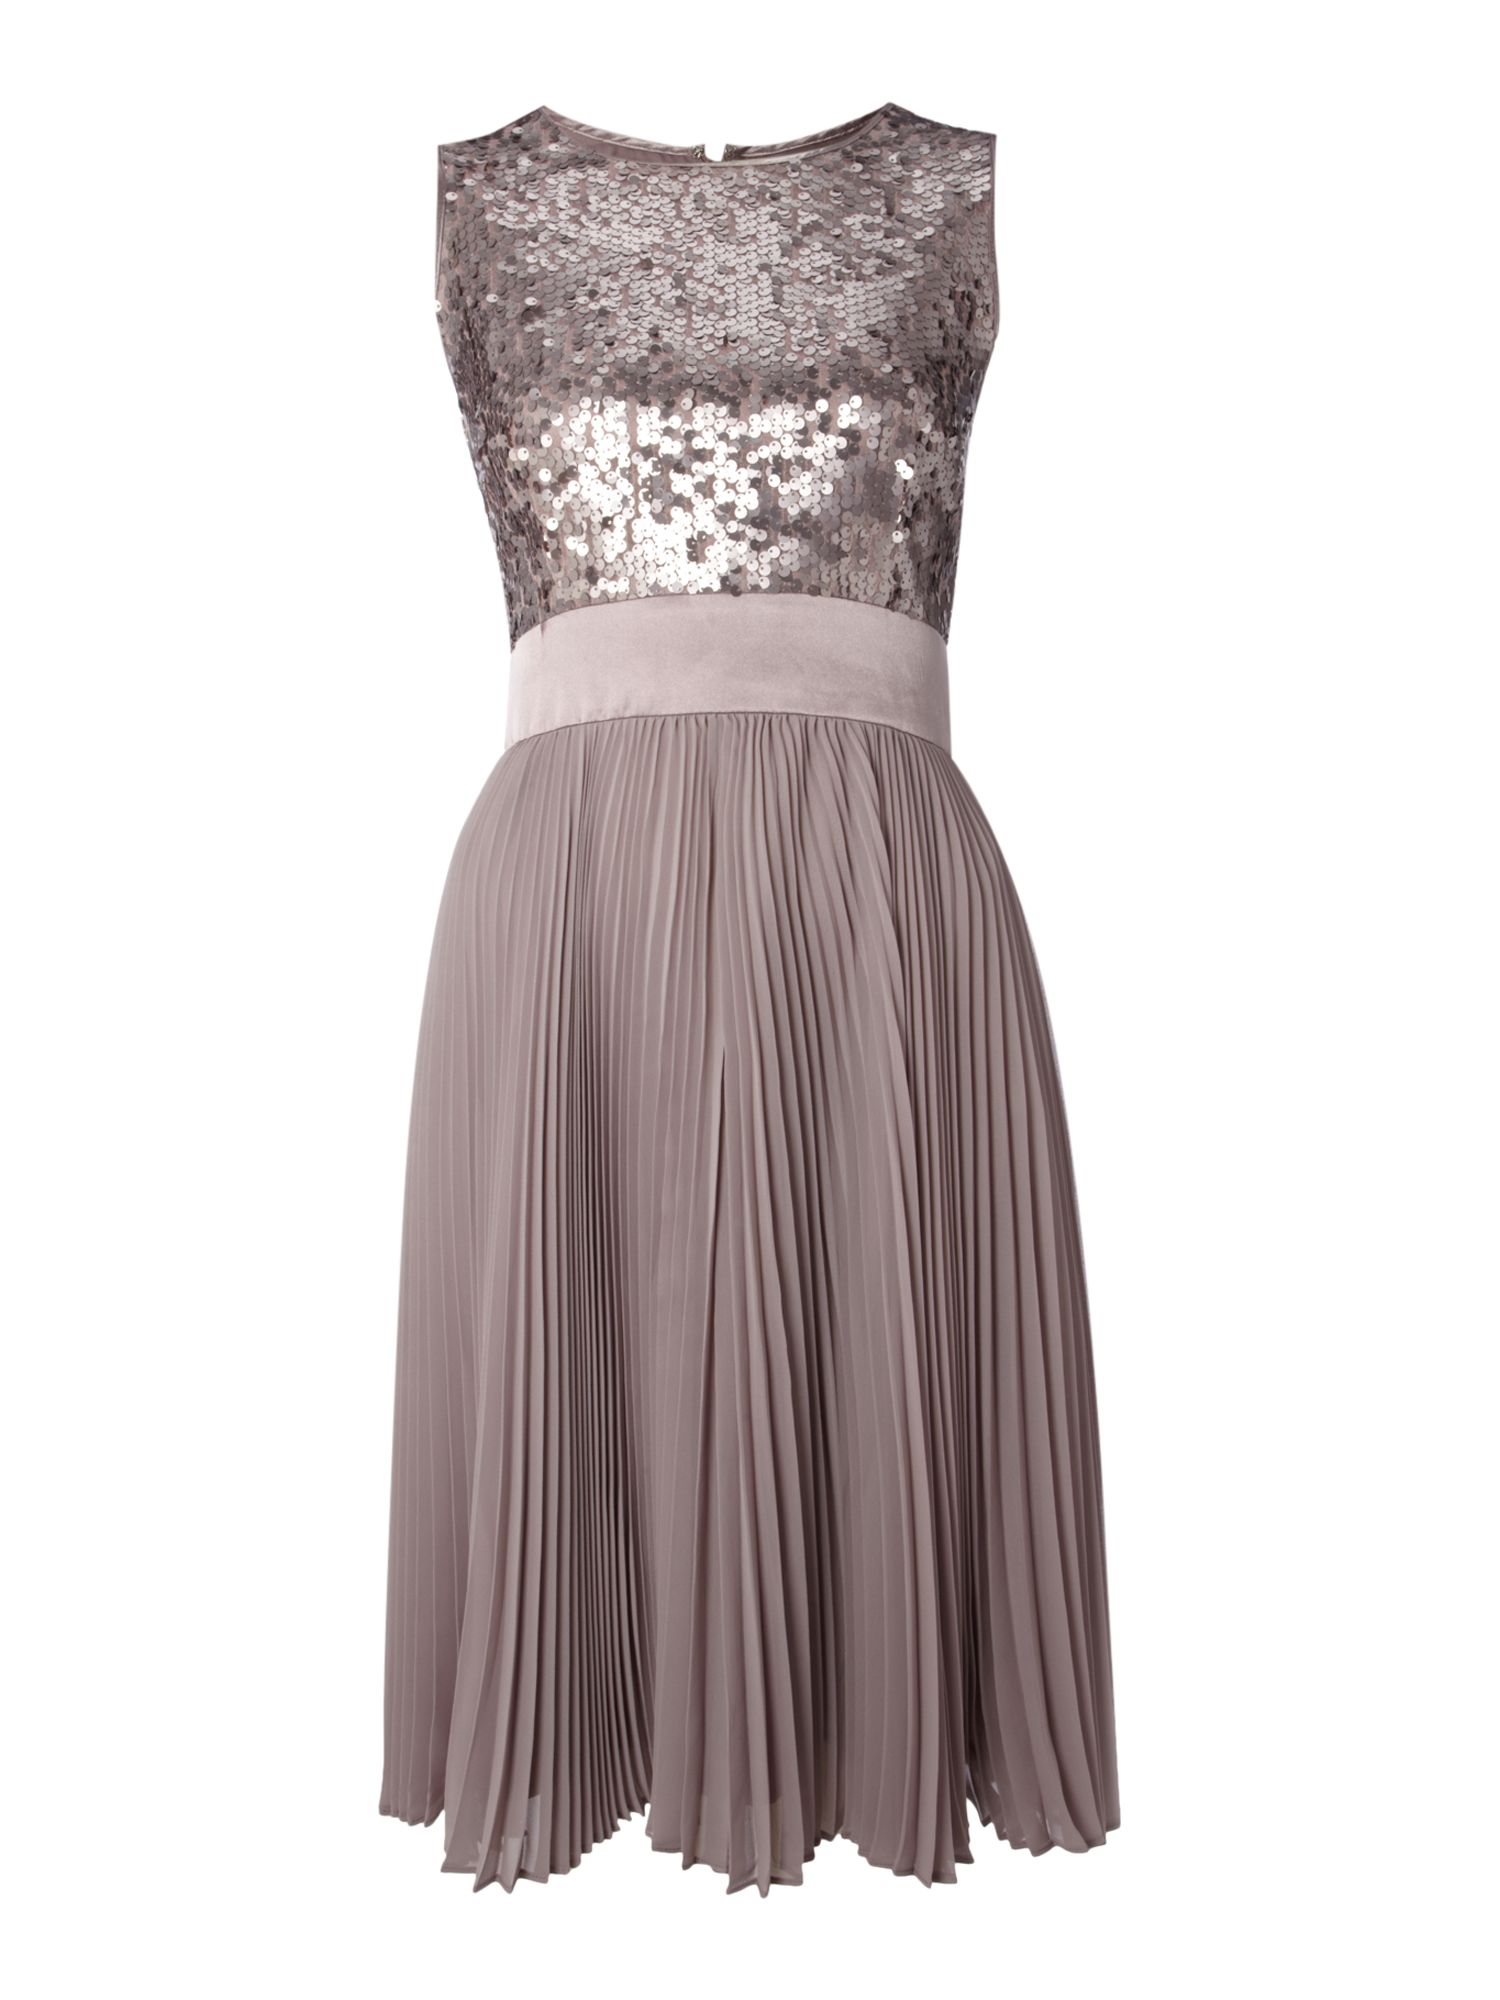 Eliza j Sequin Top Dress with Pleated Skirt in Natural | Lyst